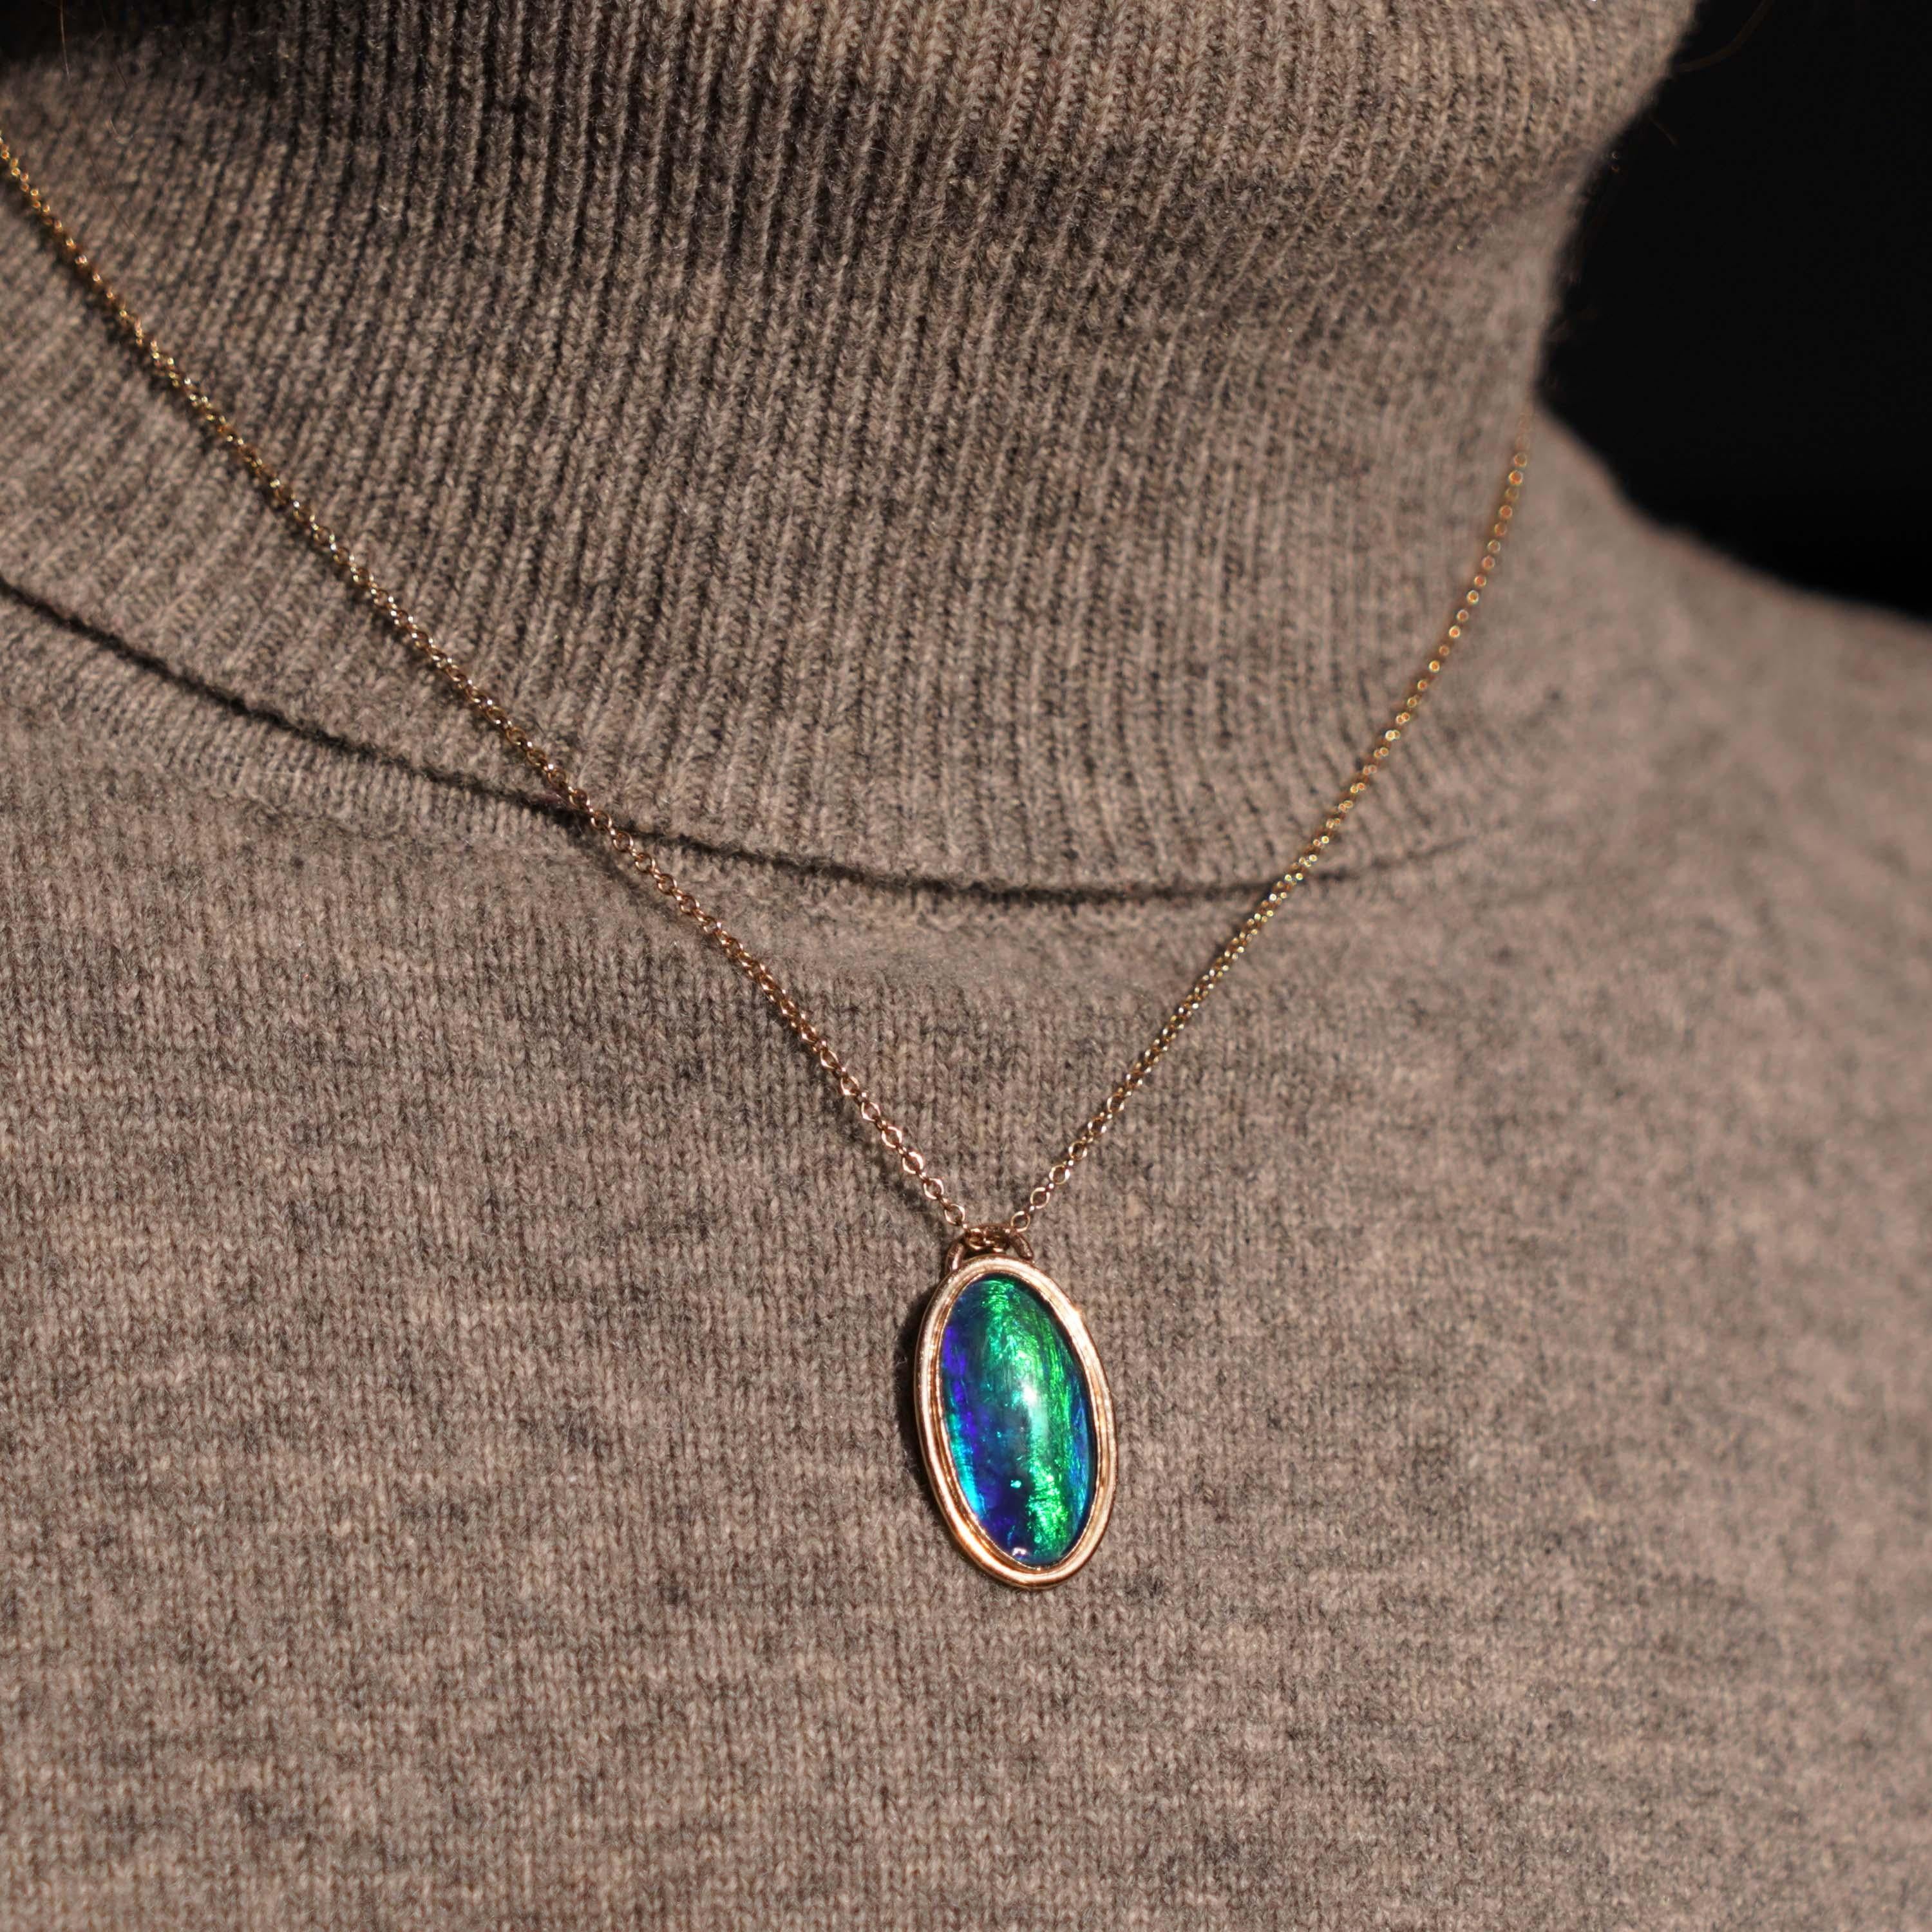 9K Gold Blue/Green Ammolite Pendant & Chain Necklace For Sale 8